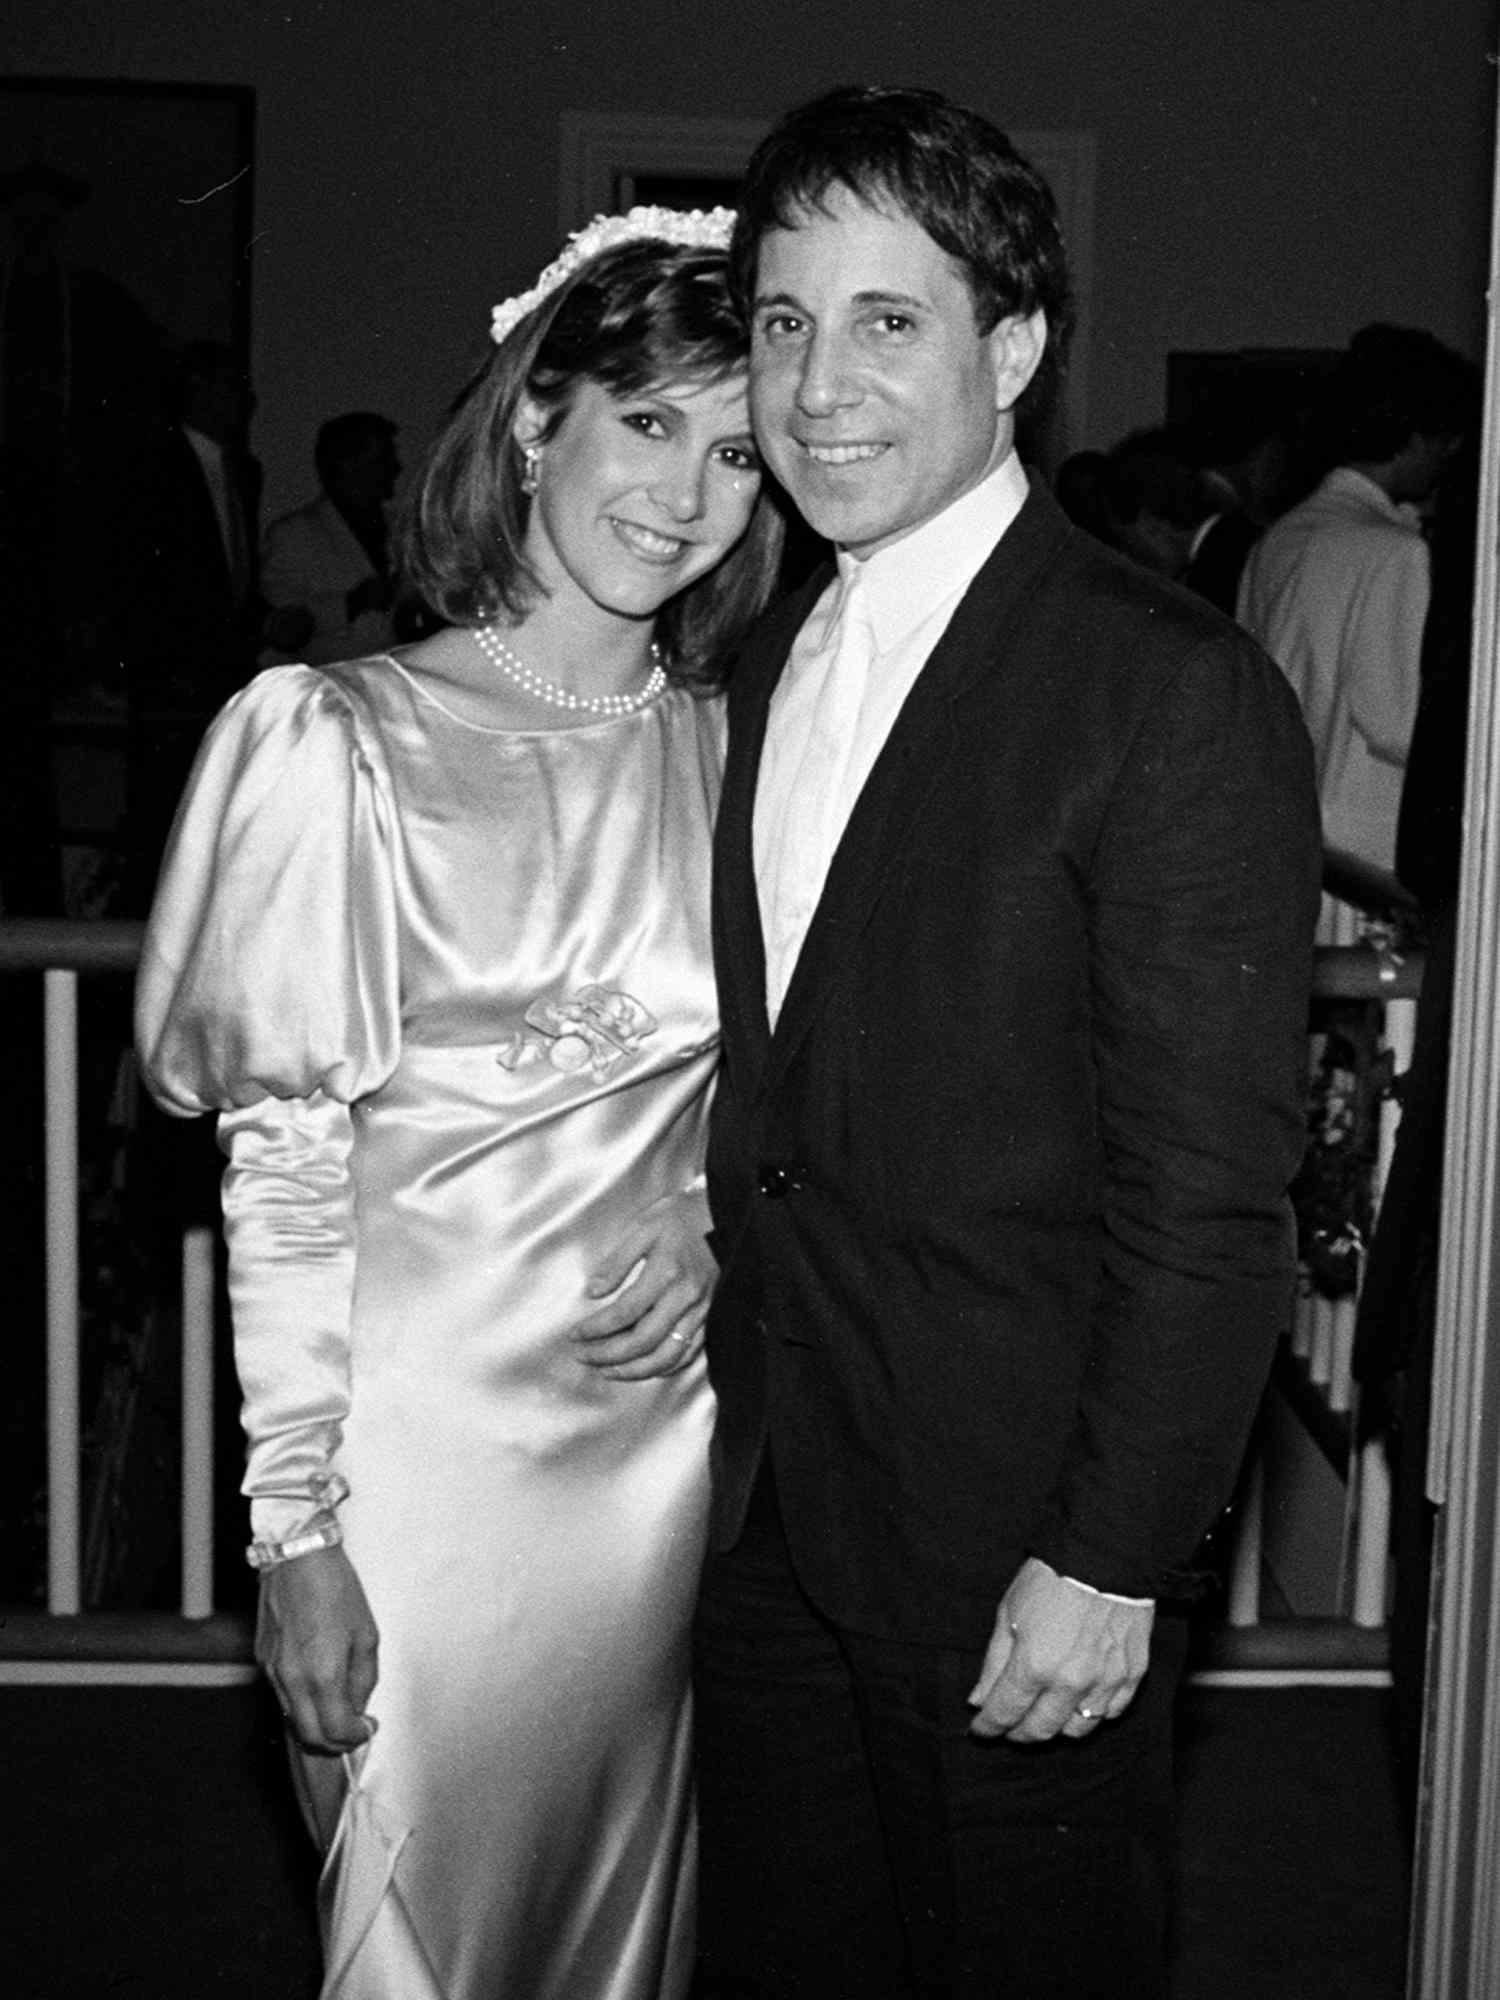 UNITED STATES - AUGUST 01: Carrie Fisher and Paul Simon (Photo by The LIFE Picture Collection/Getty Images)